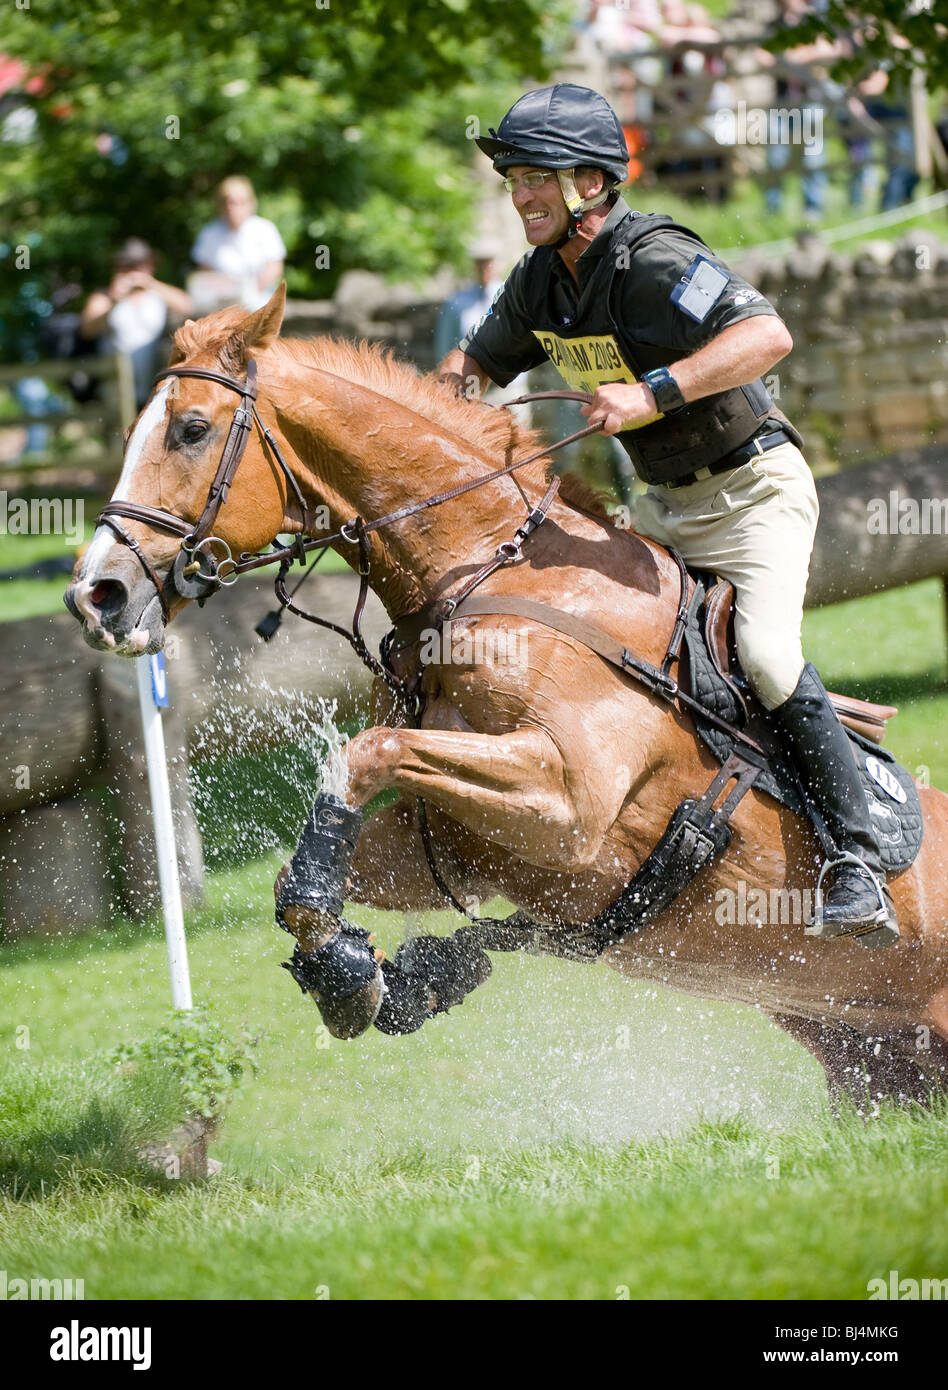 New Zealand Jockey Andrew  Nicholson exits the water complex At  Bramham Horse trials 2009 on his Horse  Nereo Stock Photo